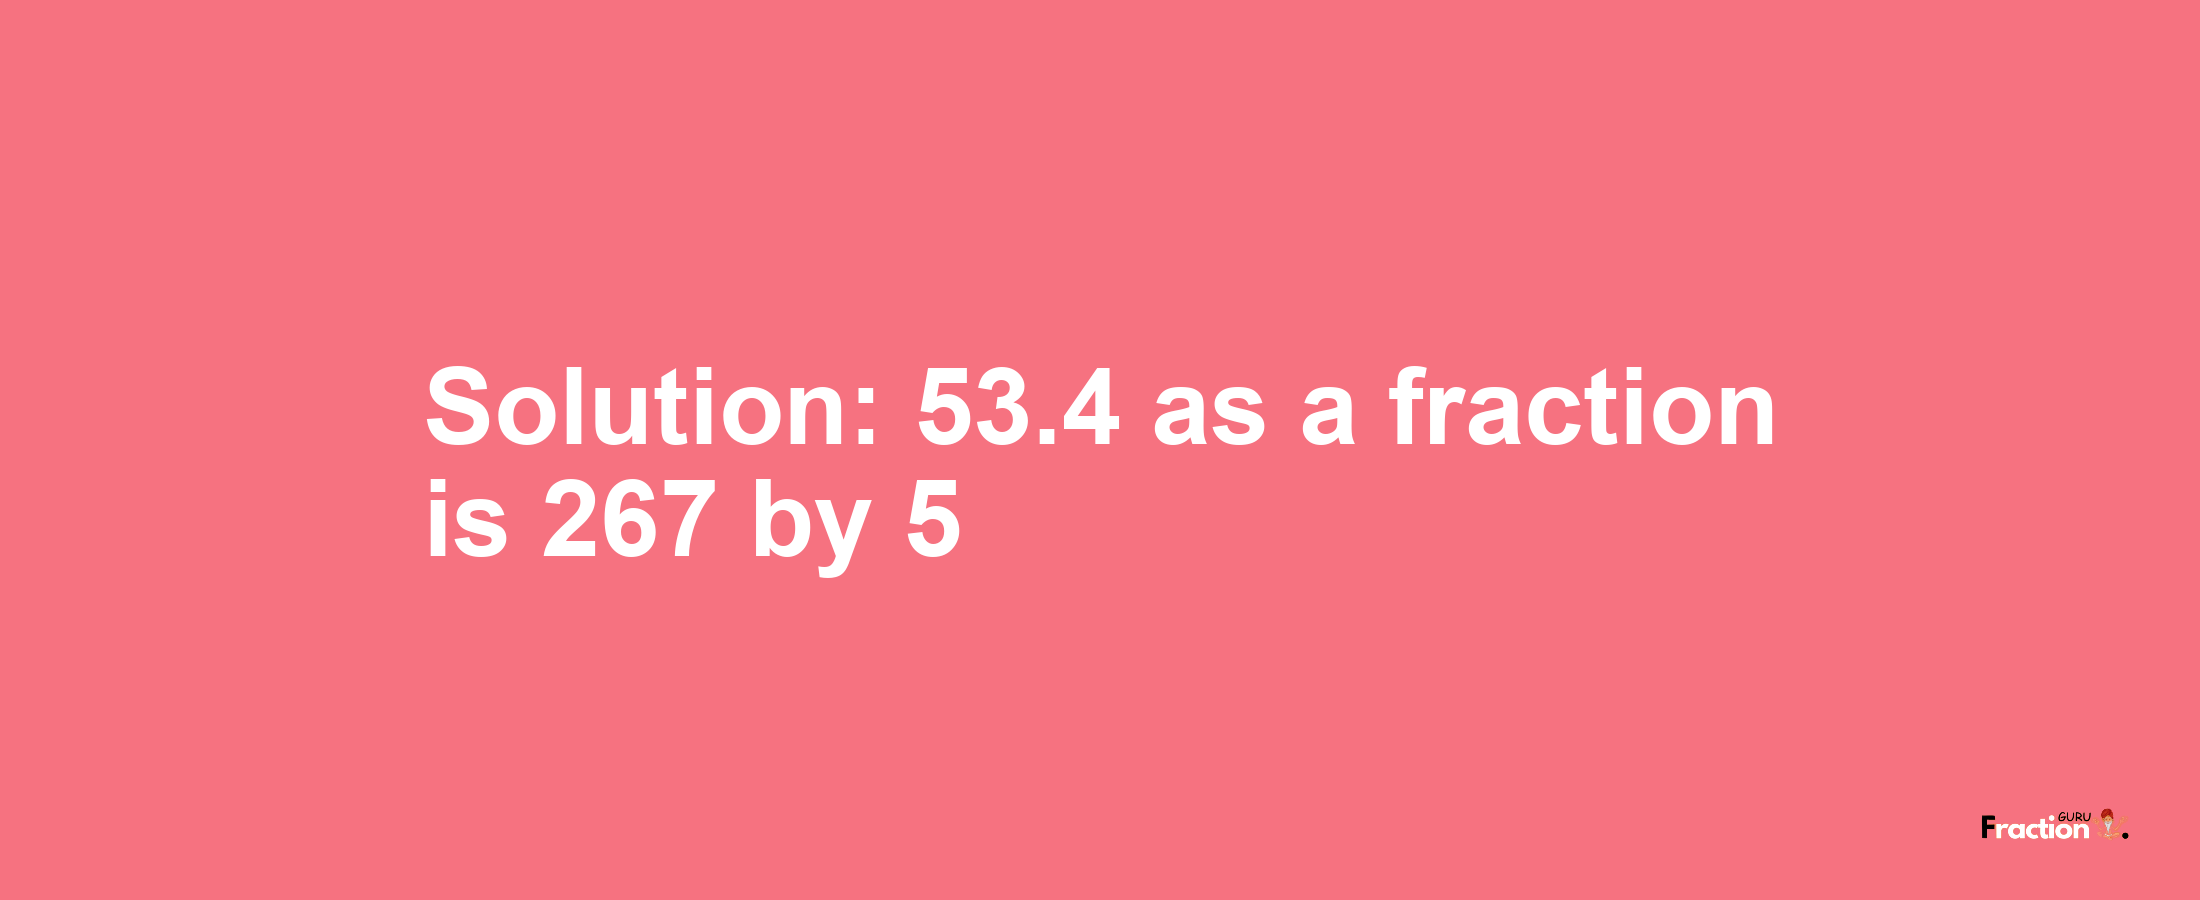 Solution:53.4 as a fraction is 267/5